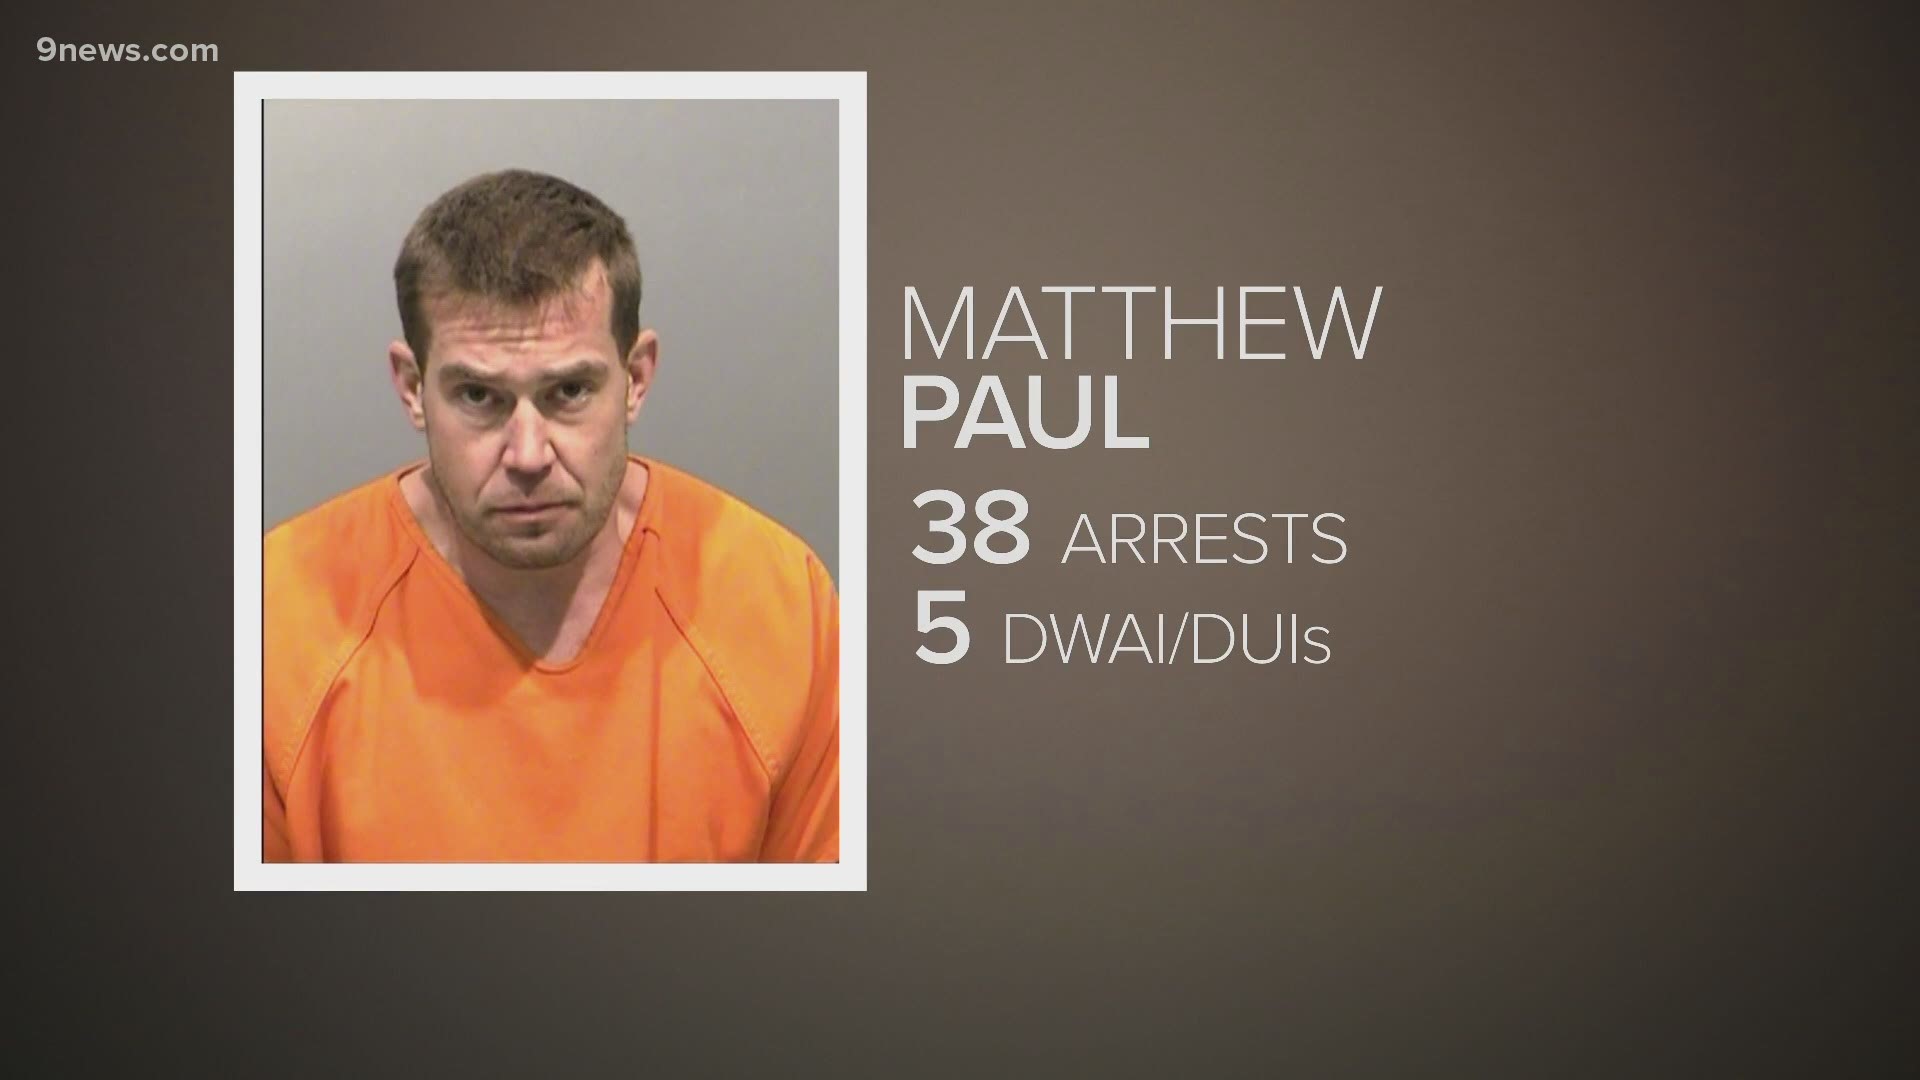 That suspect is identified as 46-year-old Matthew Lyvon Paul of Denver. Police said last month he slammed into a Wheat Ridge police patrol car.